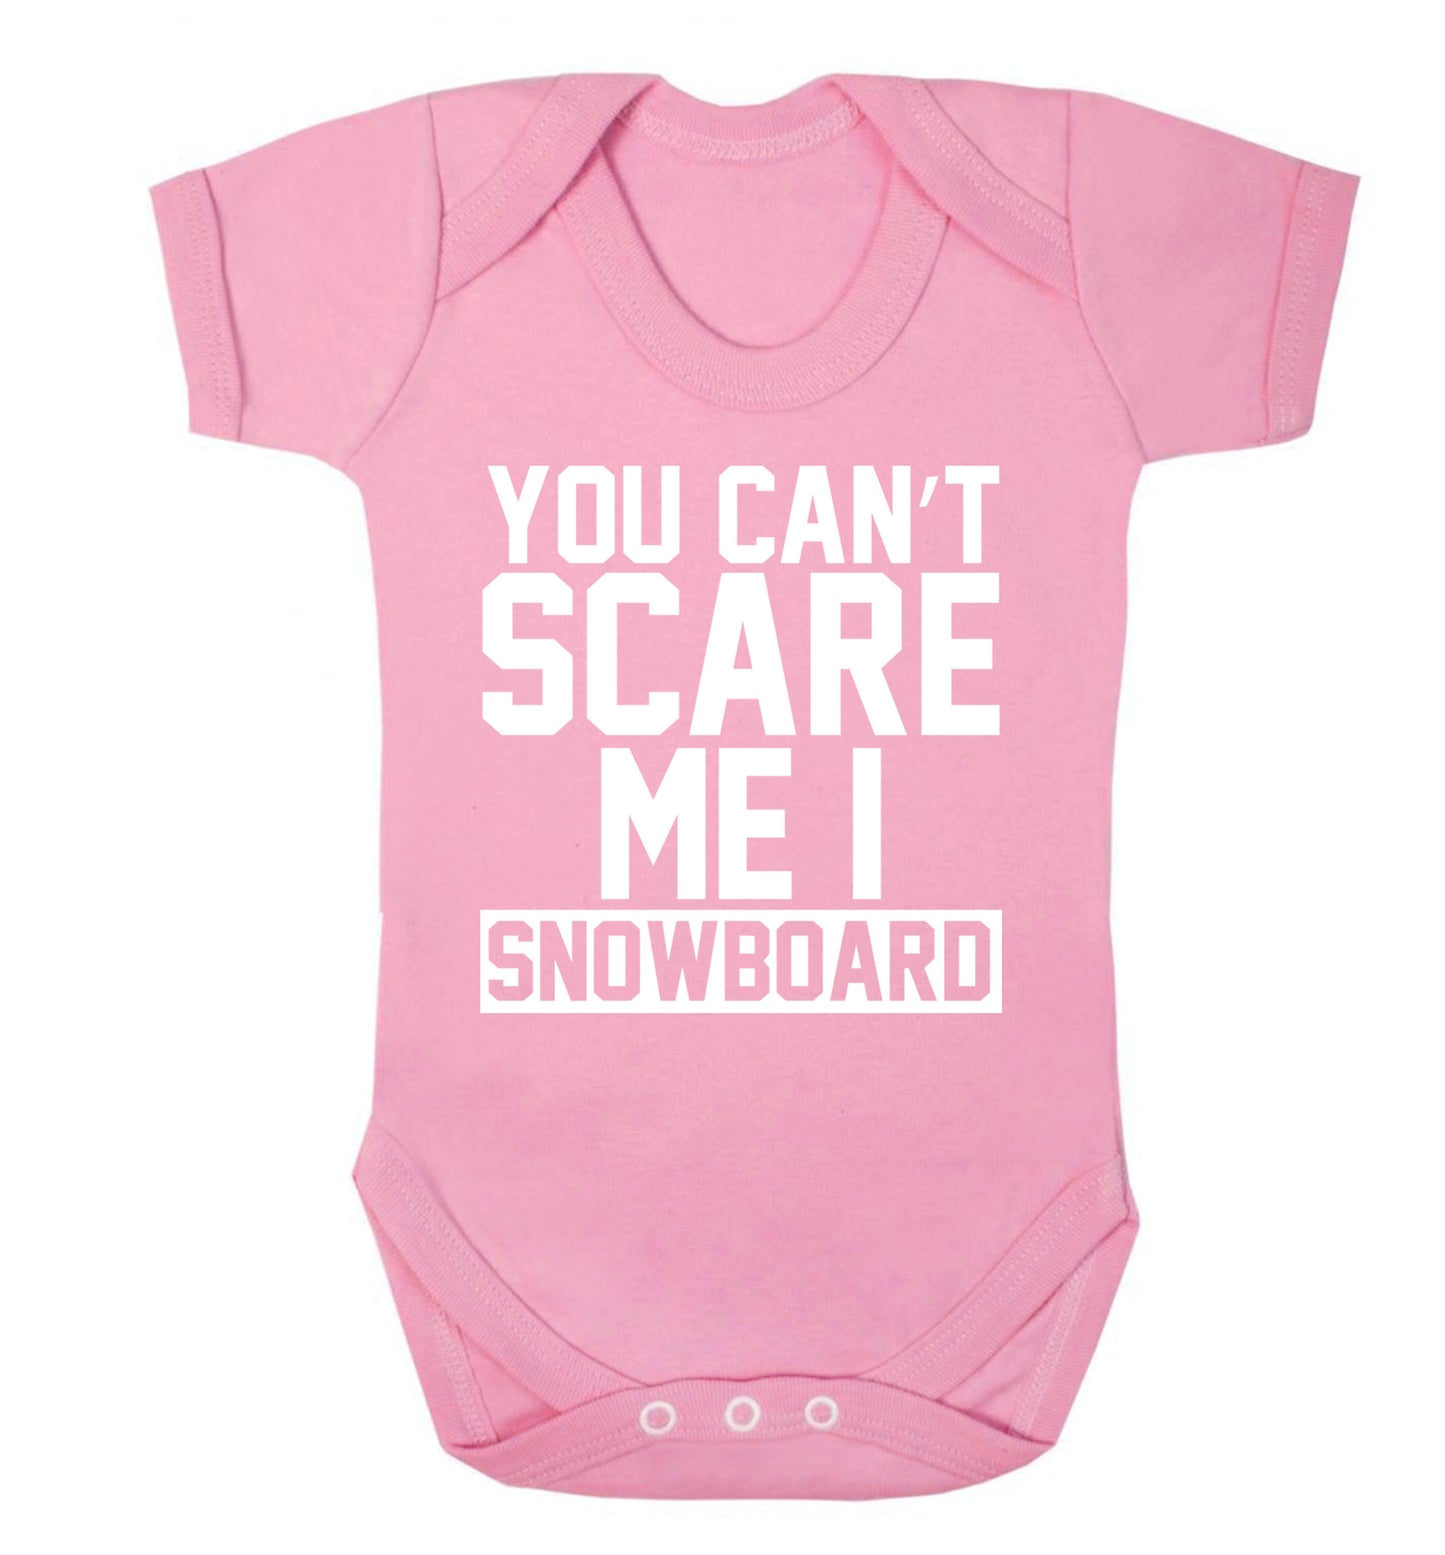 You can't scare me I snowboard Baby Vest pale pink 18-24 months